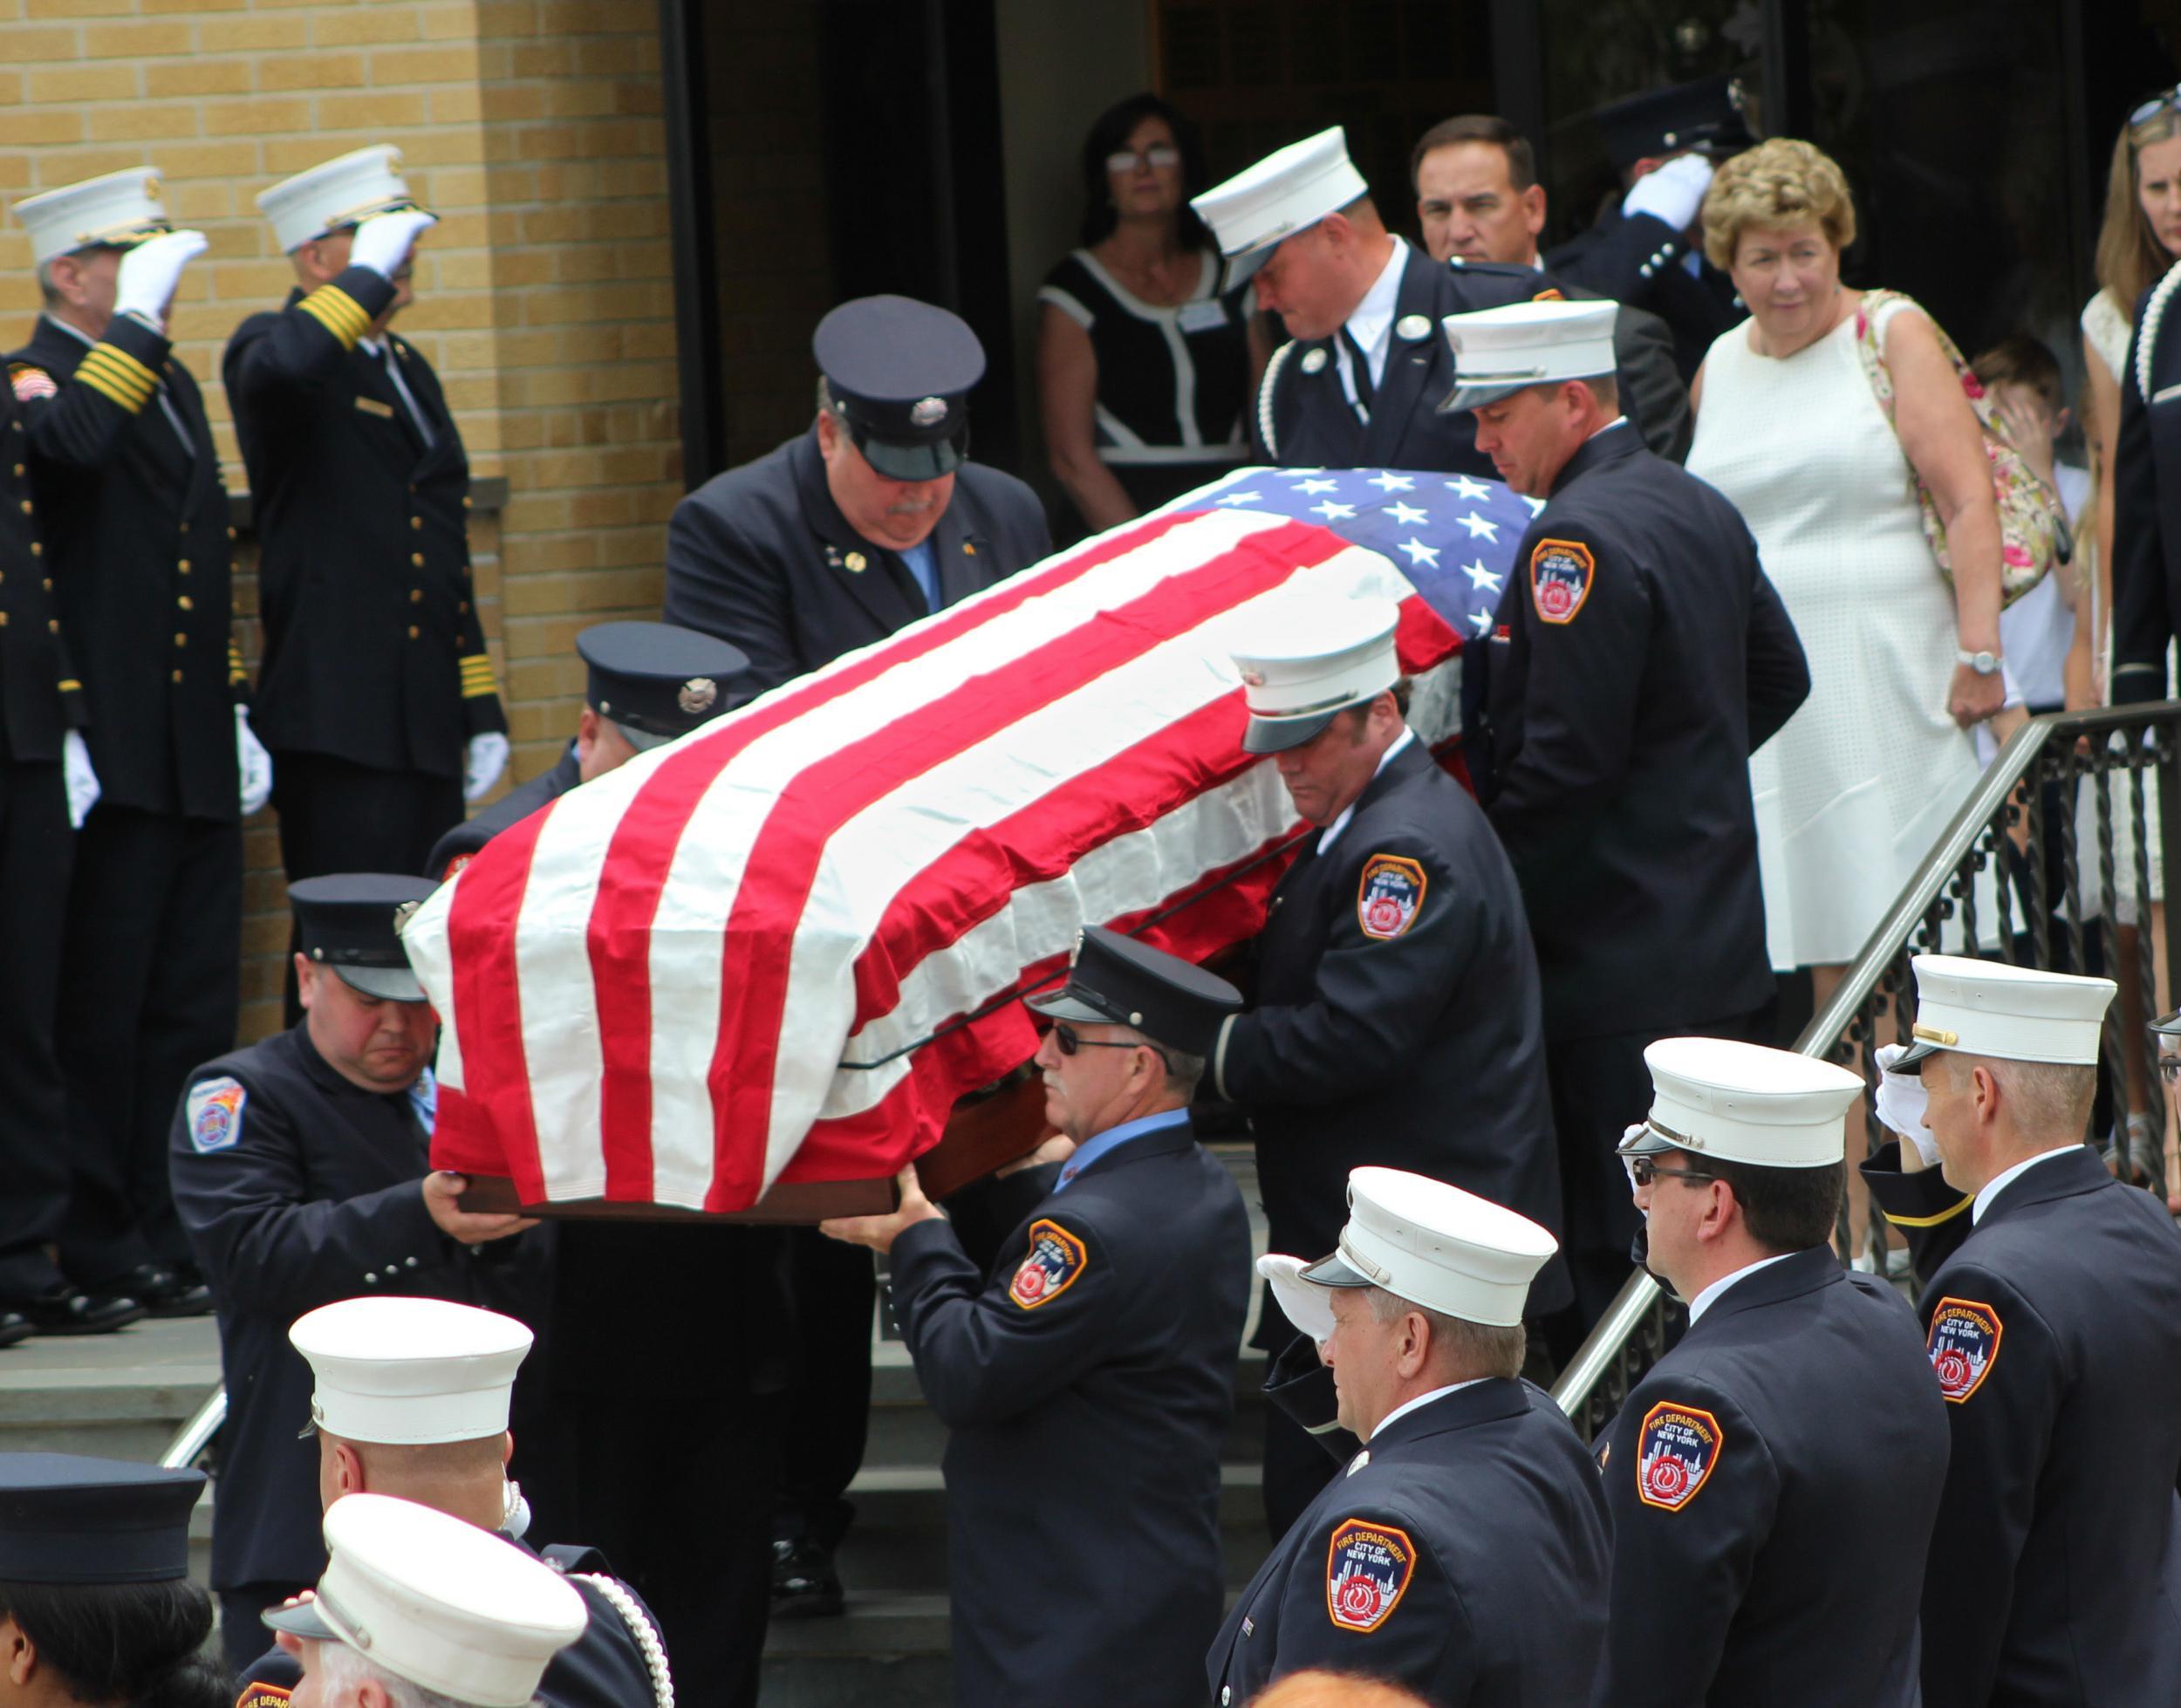 The flag-draped casket is followed by Mr Stack's wife, Theresa